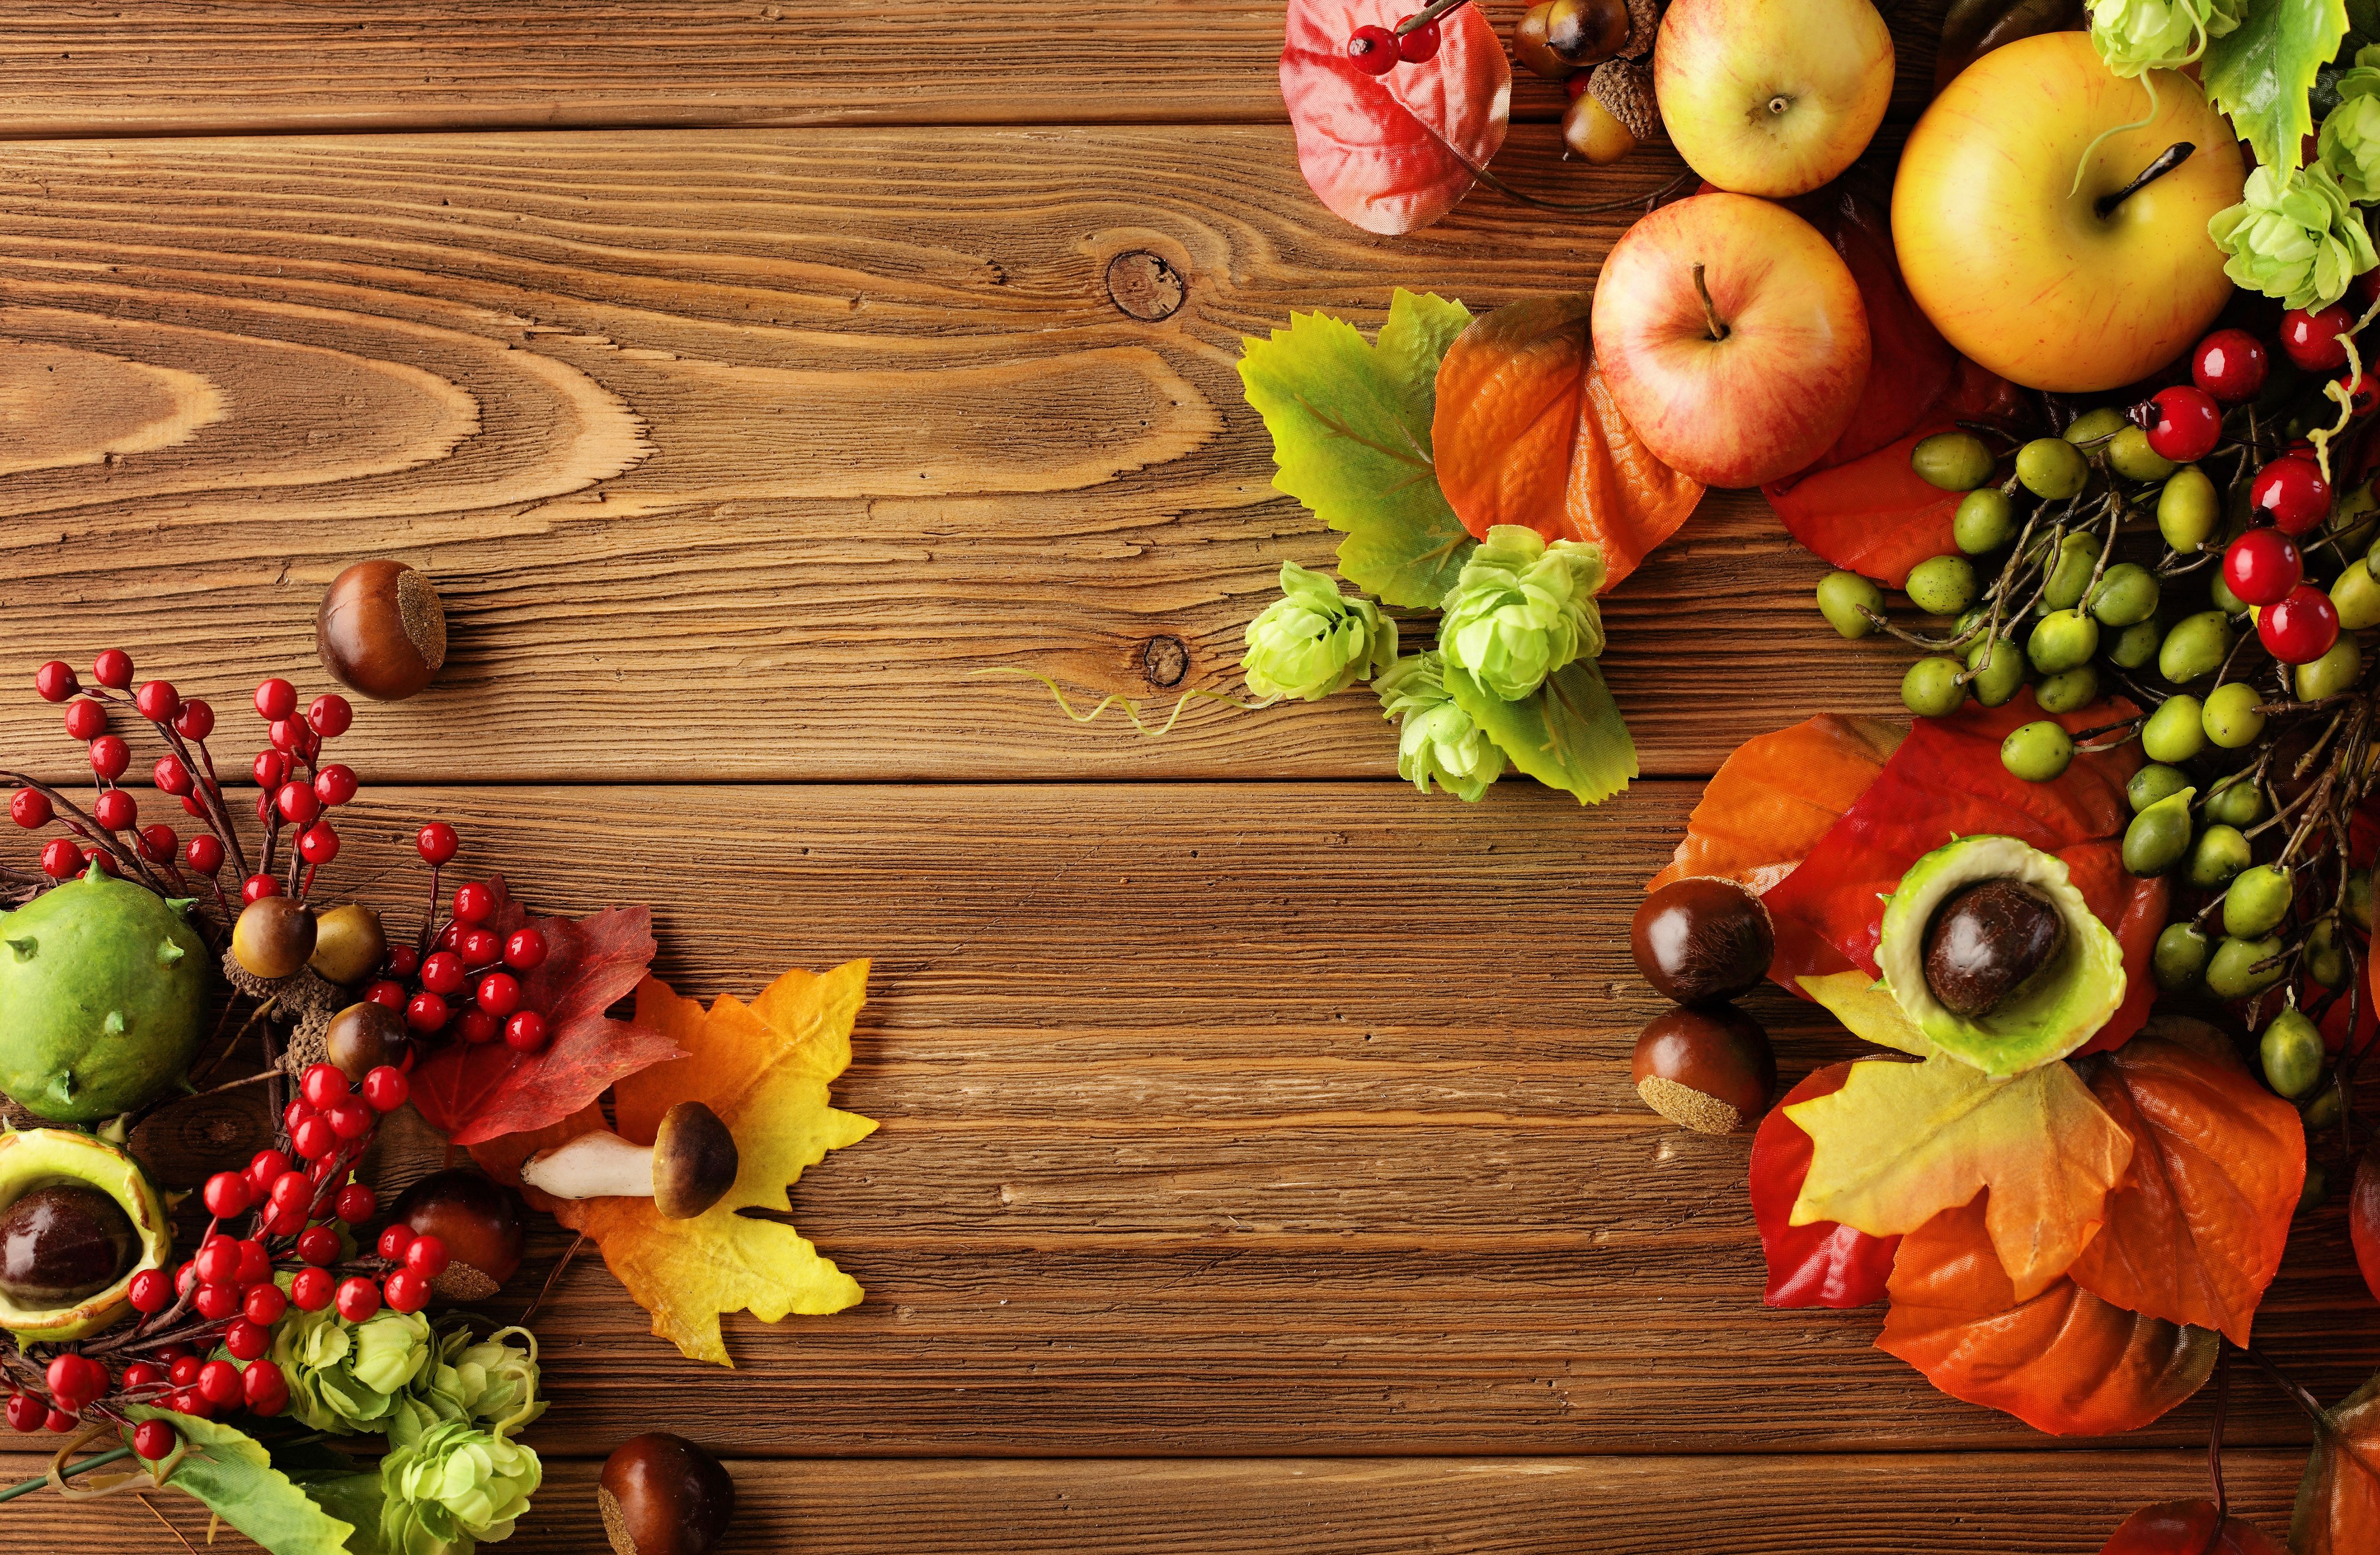 Fall Wooden Backgrounds with Fruits​